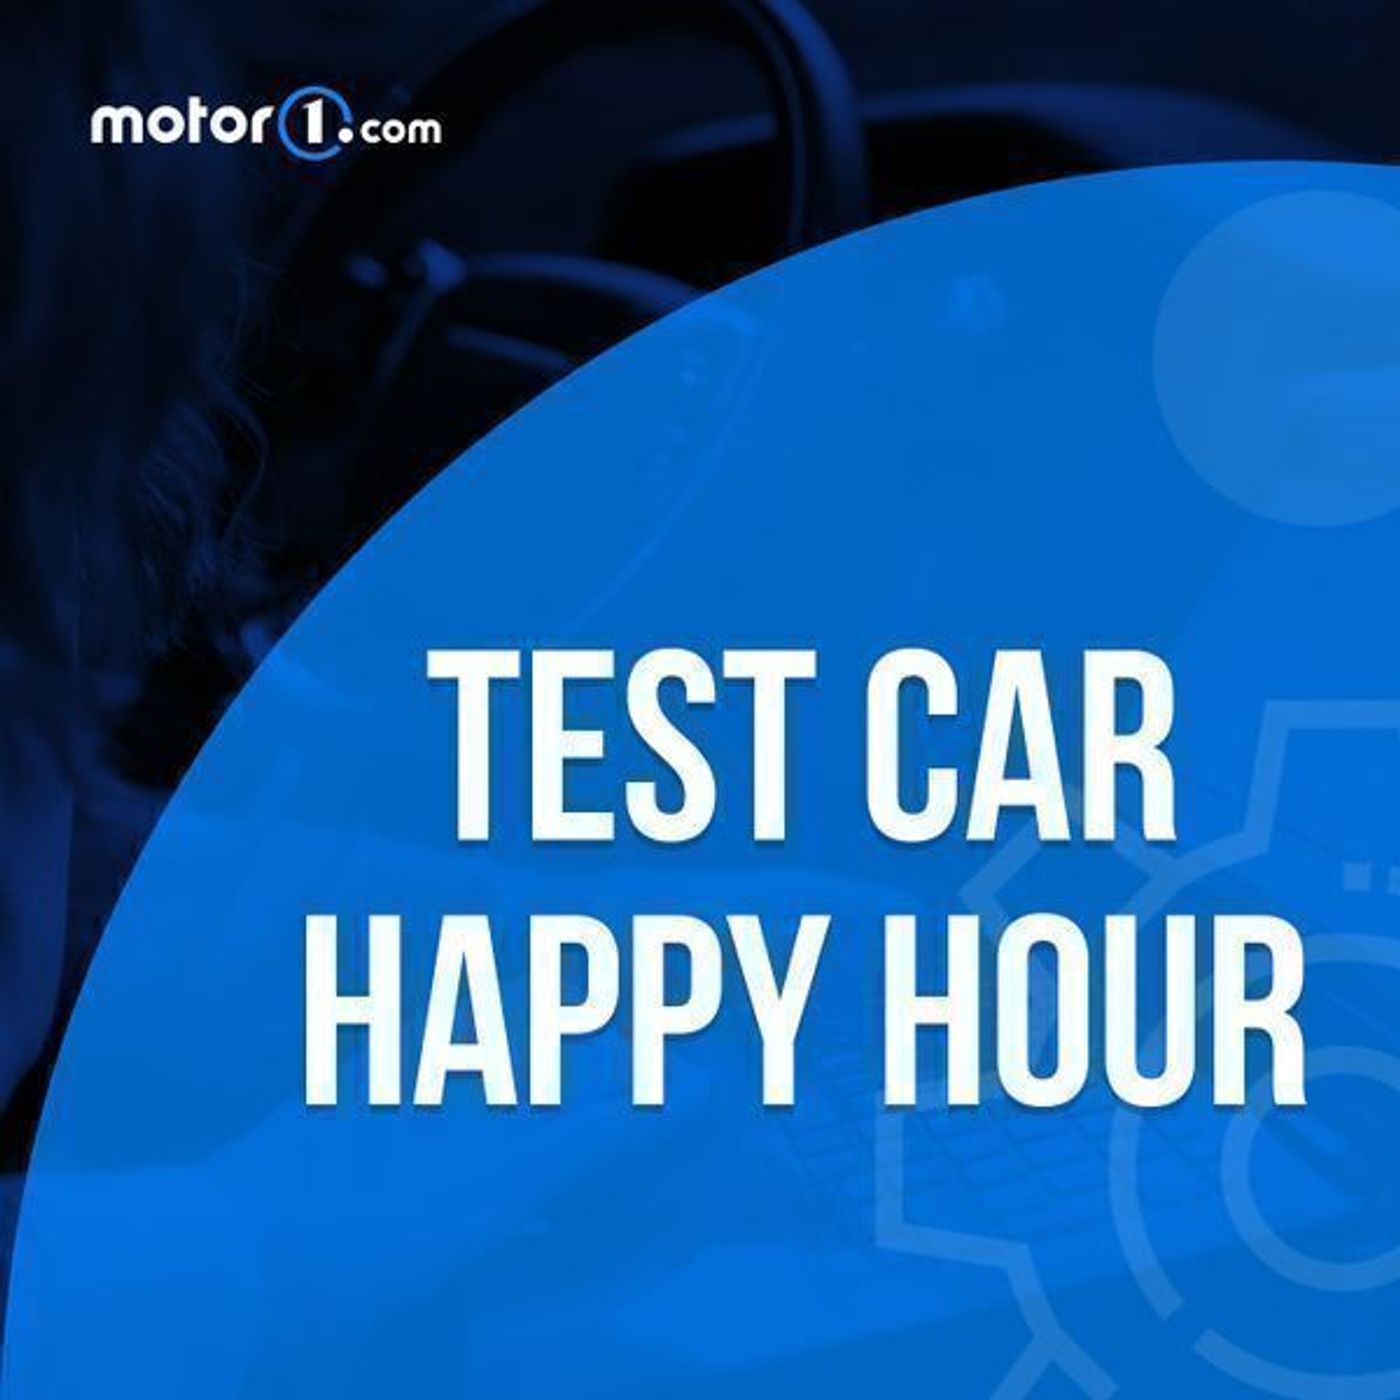 S2 Ep136: Motor1.com Test Car Happy Hour #52: Ford Mustang Dark Horse, Chrysler 300C, BMW M3 Edition 50 Jahre